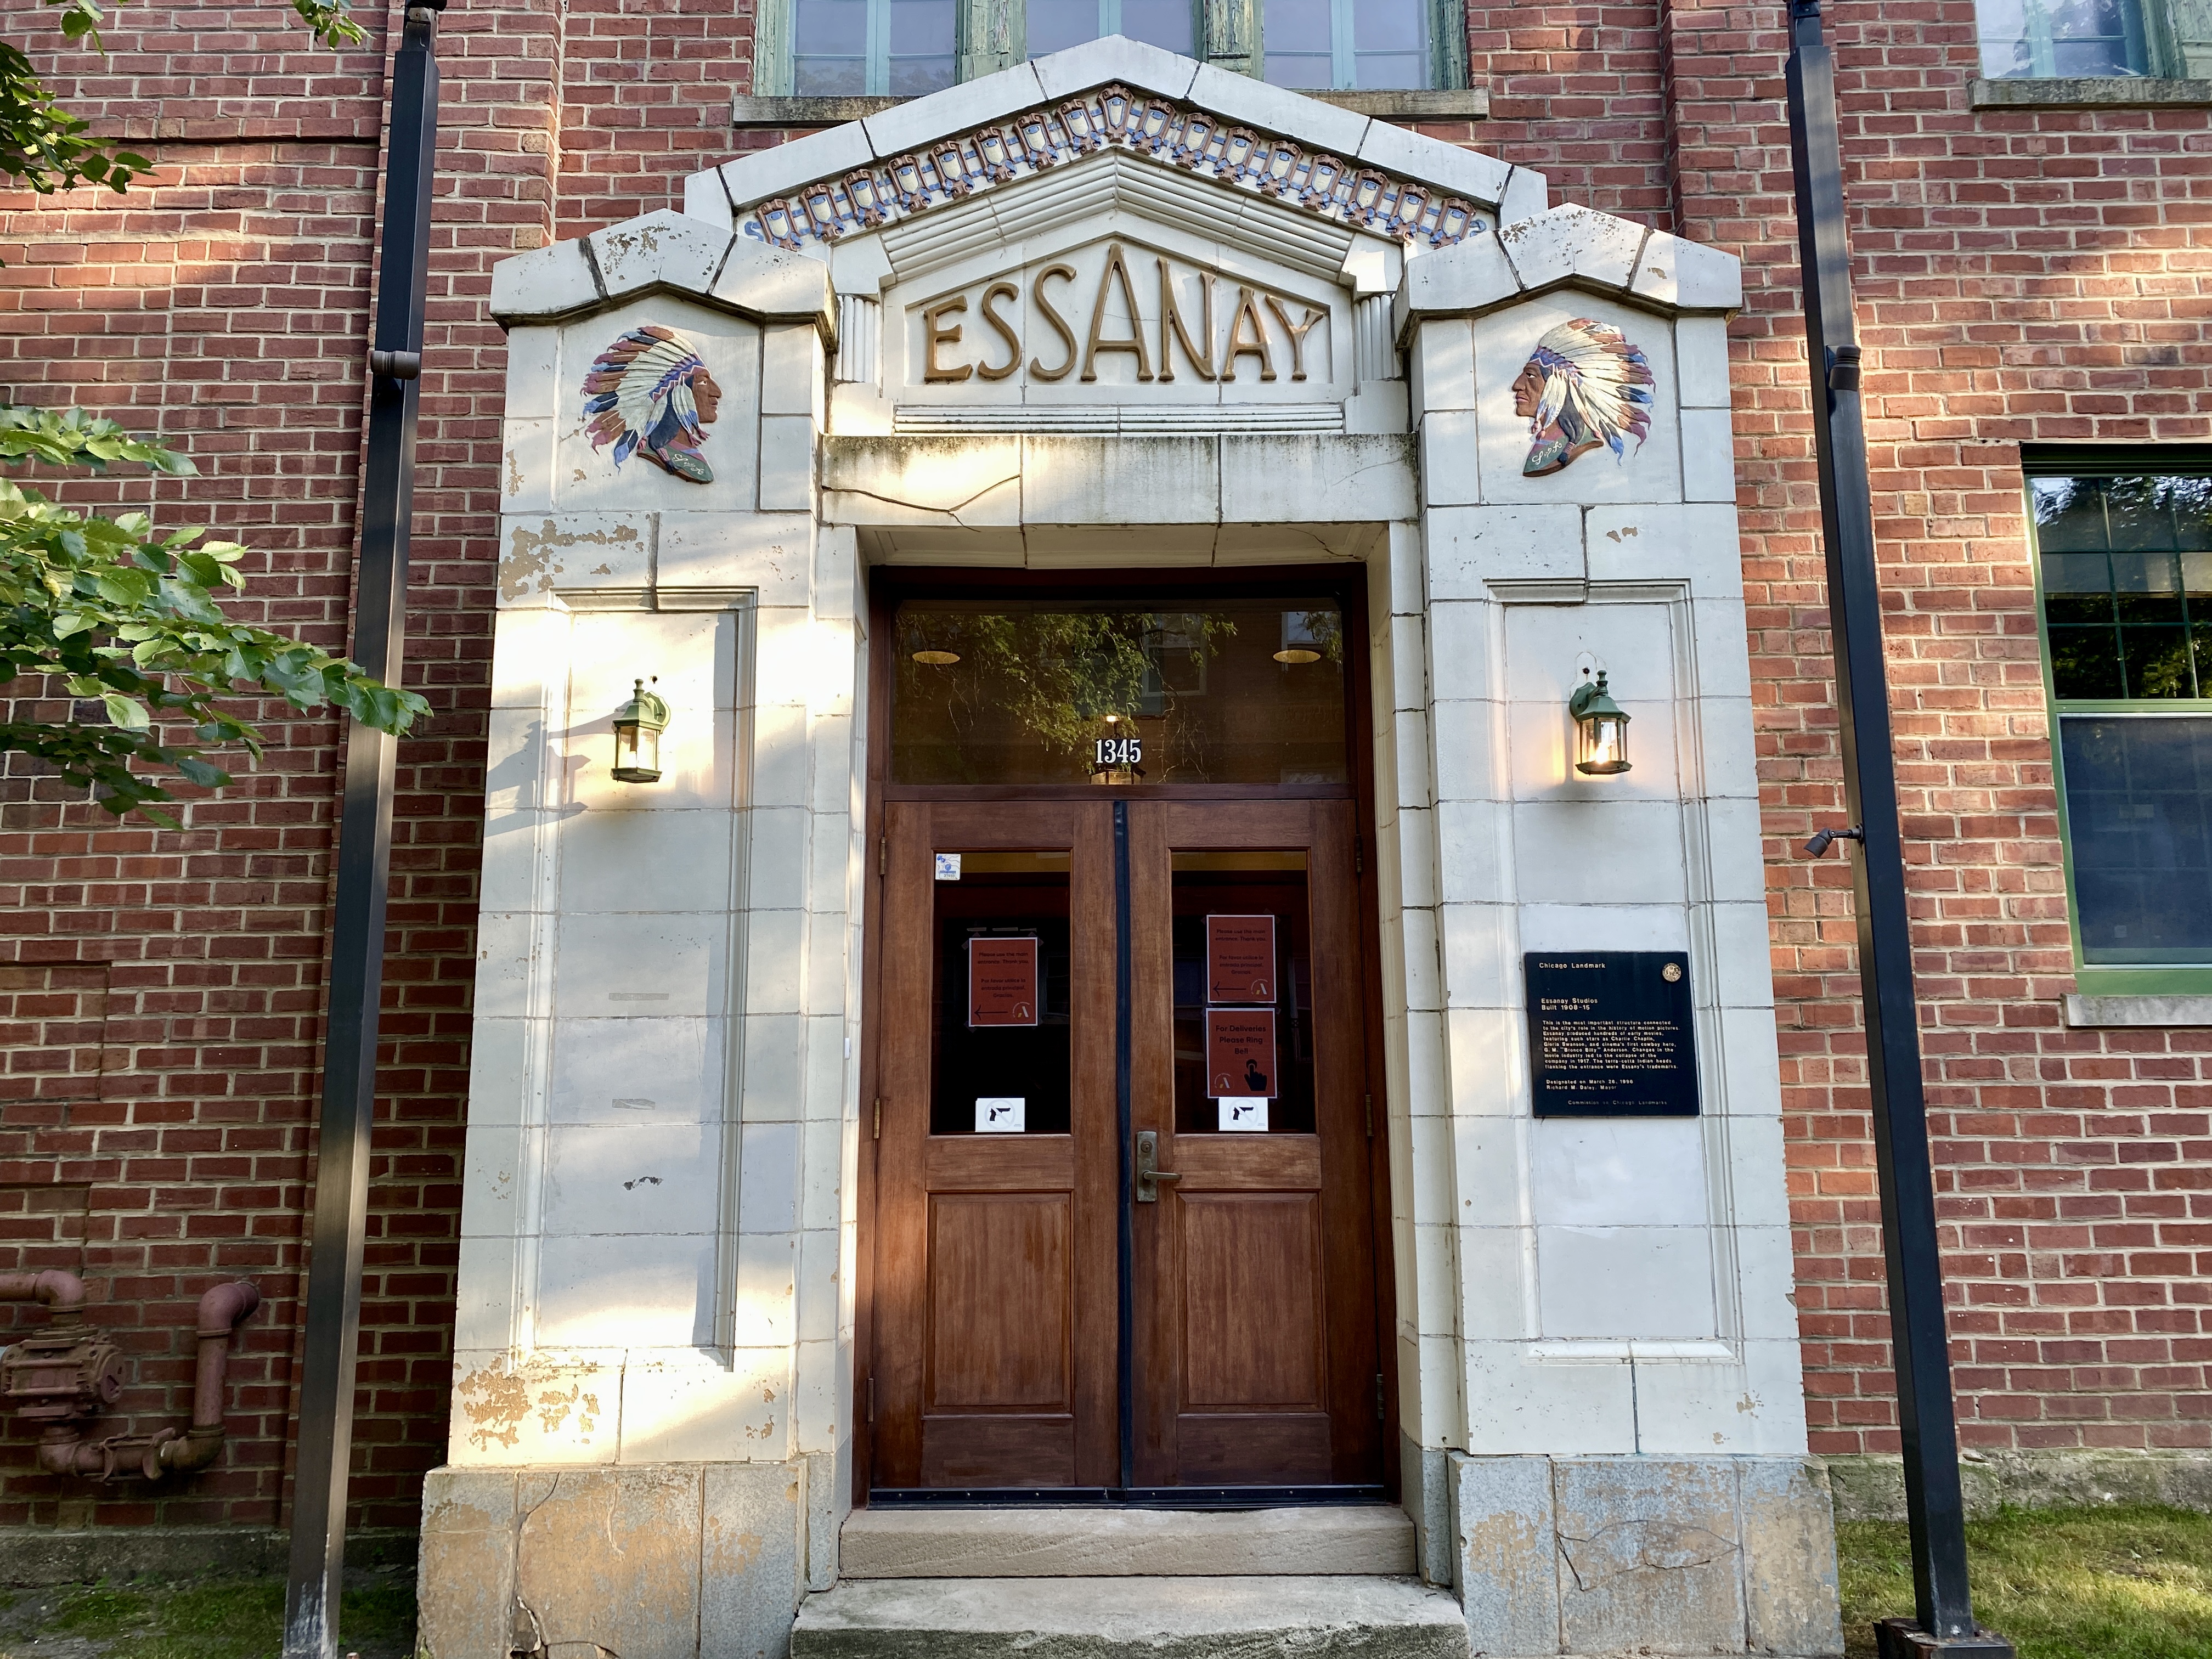 Full view an arched entryway to a brick building, matching reliefs of a Native chief on each side and over the door the stylized letters spelling ESSANAY